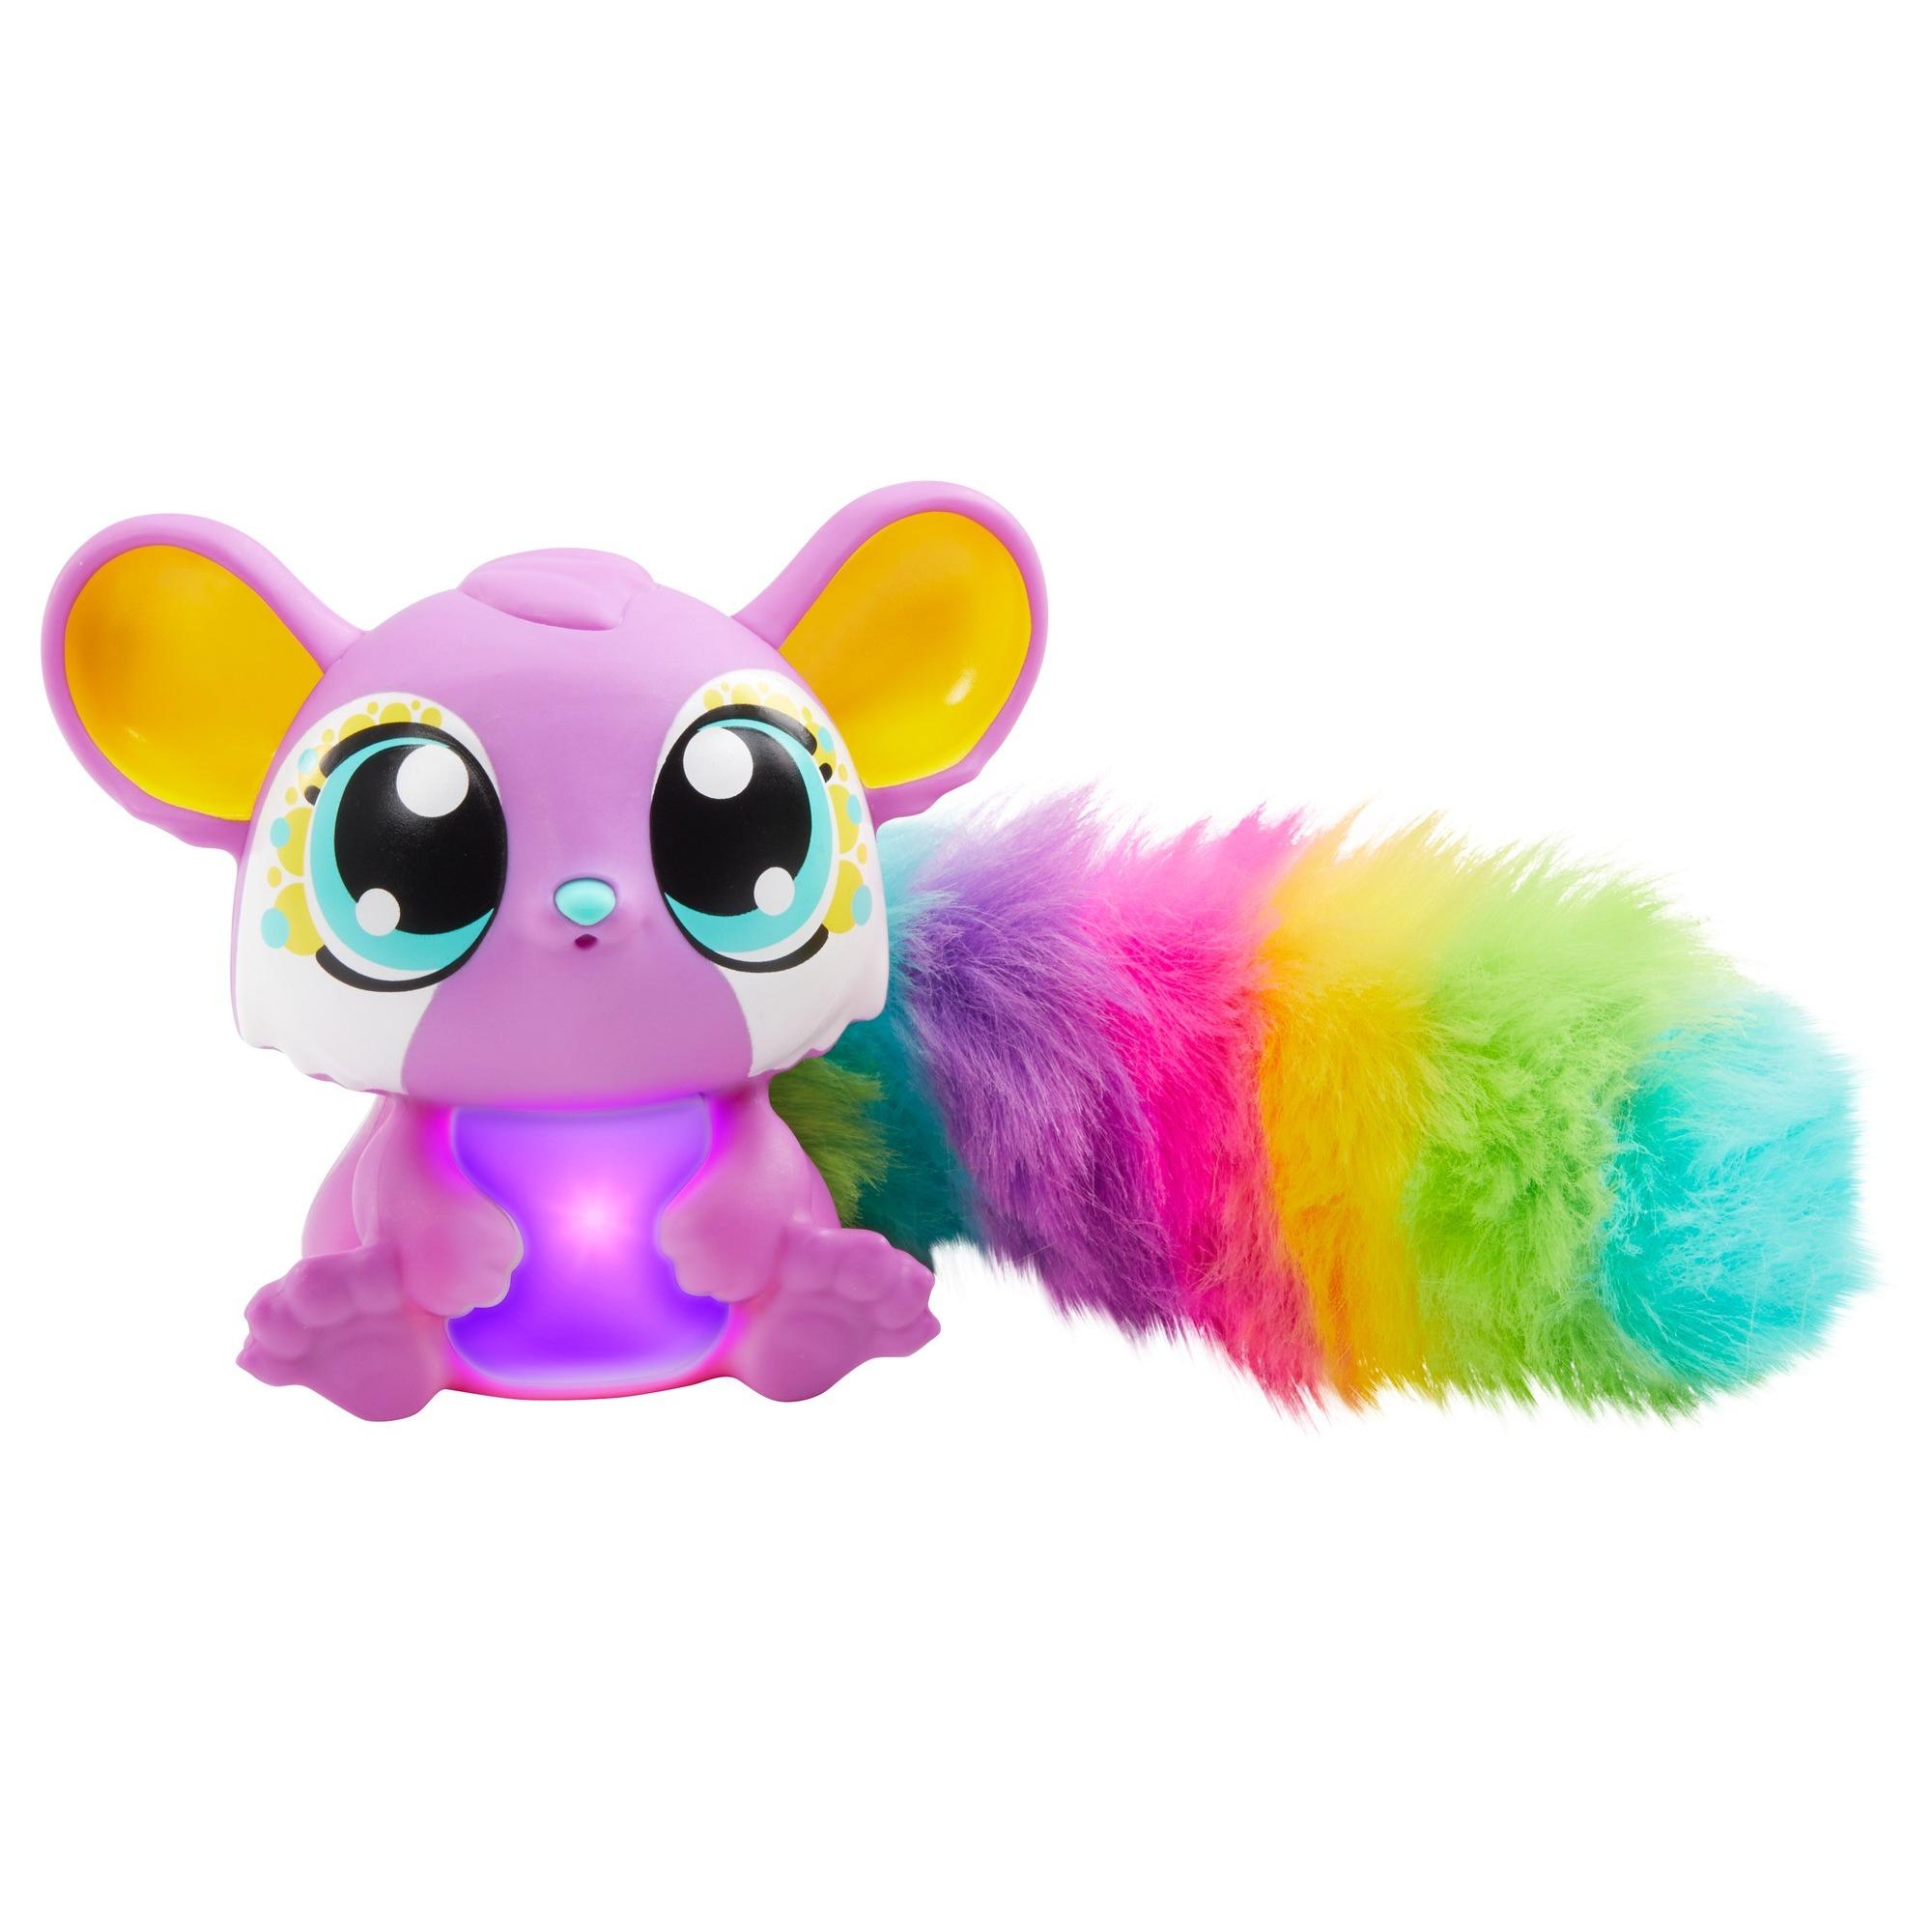 Lil' Gleemerz Babies Interactive Light-Up Figure (Styles May Vary) - image 18 of 18